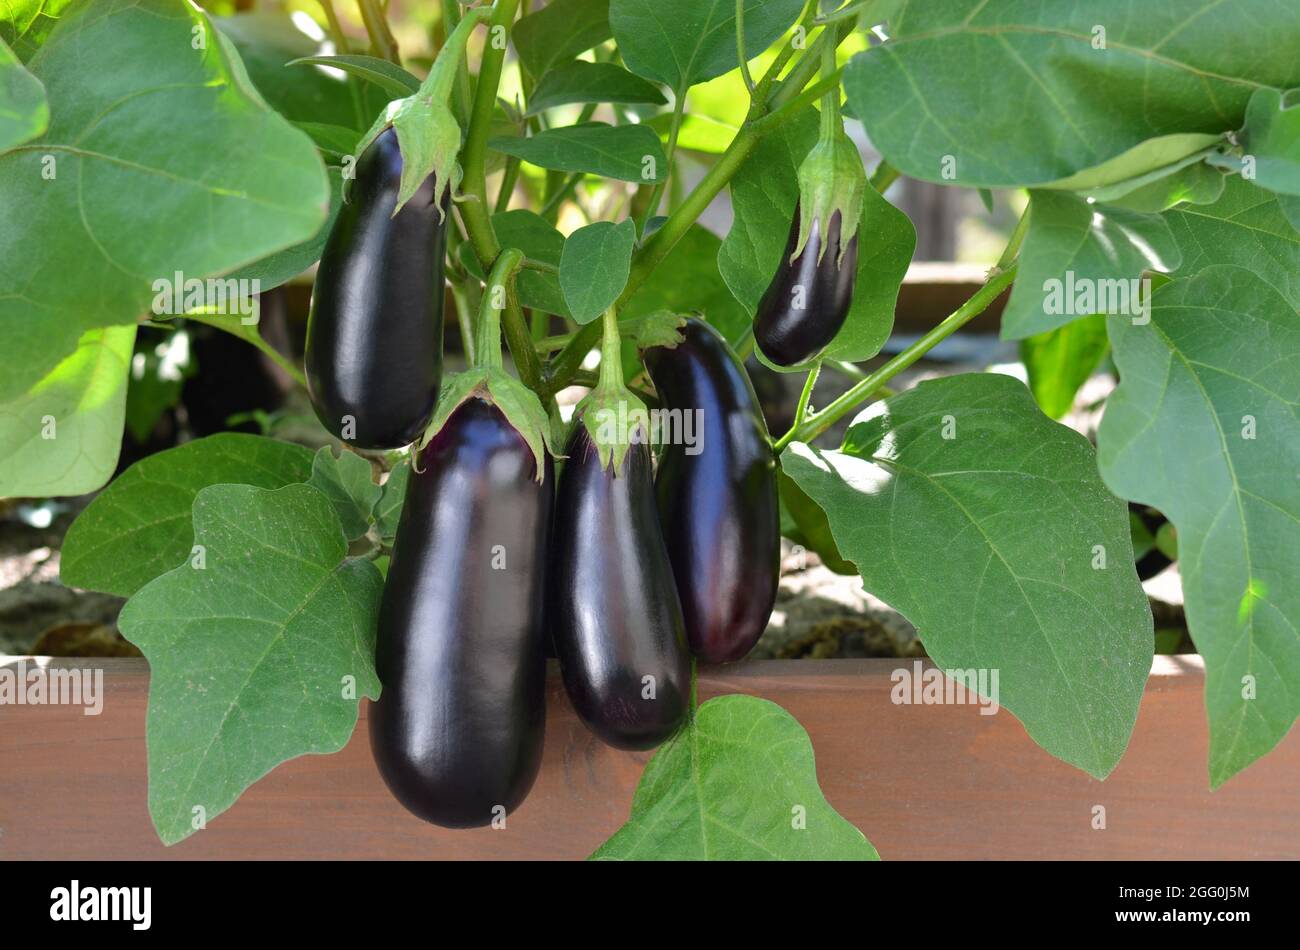 Ripe purple eggplants growing on a vegetable bed in your own garden. Organic farming concept. Stock Photo